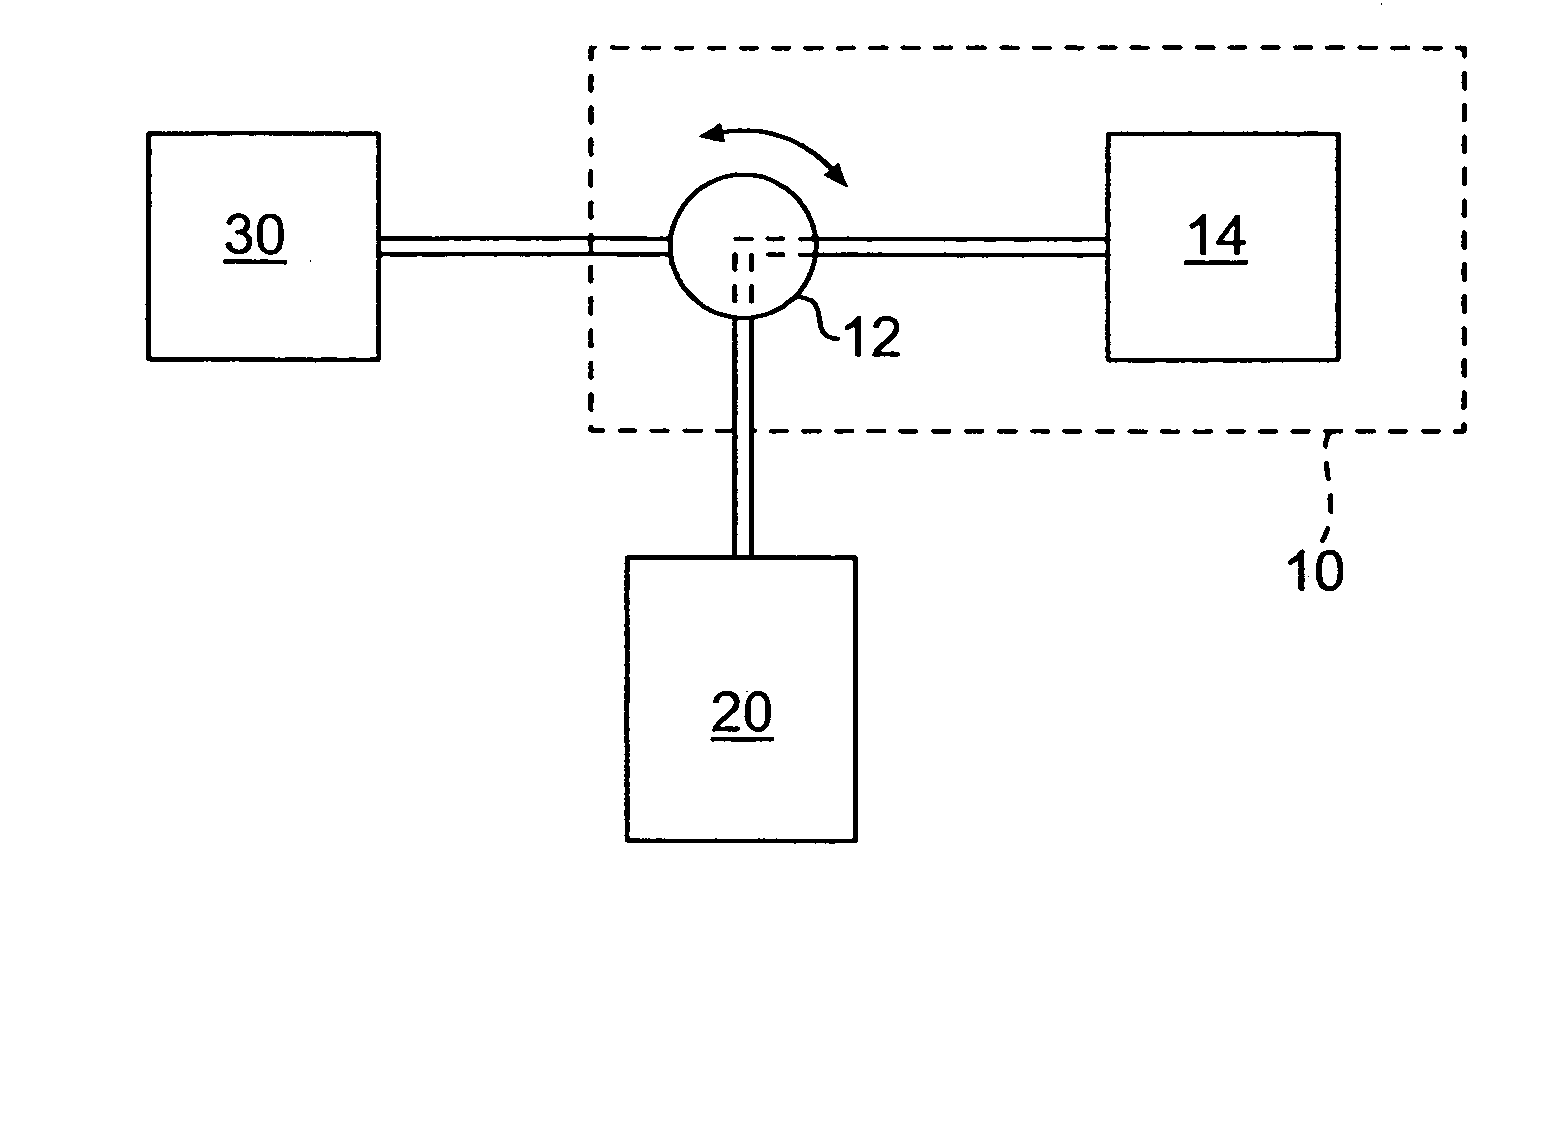 Apparatus and method for servicing a coolant system